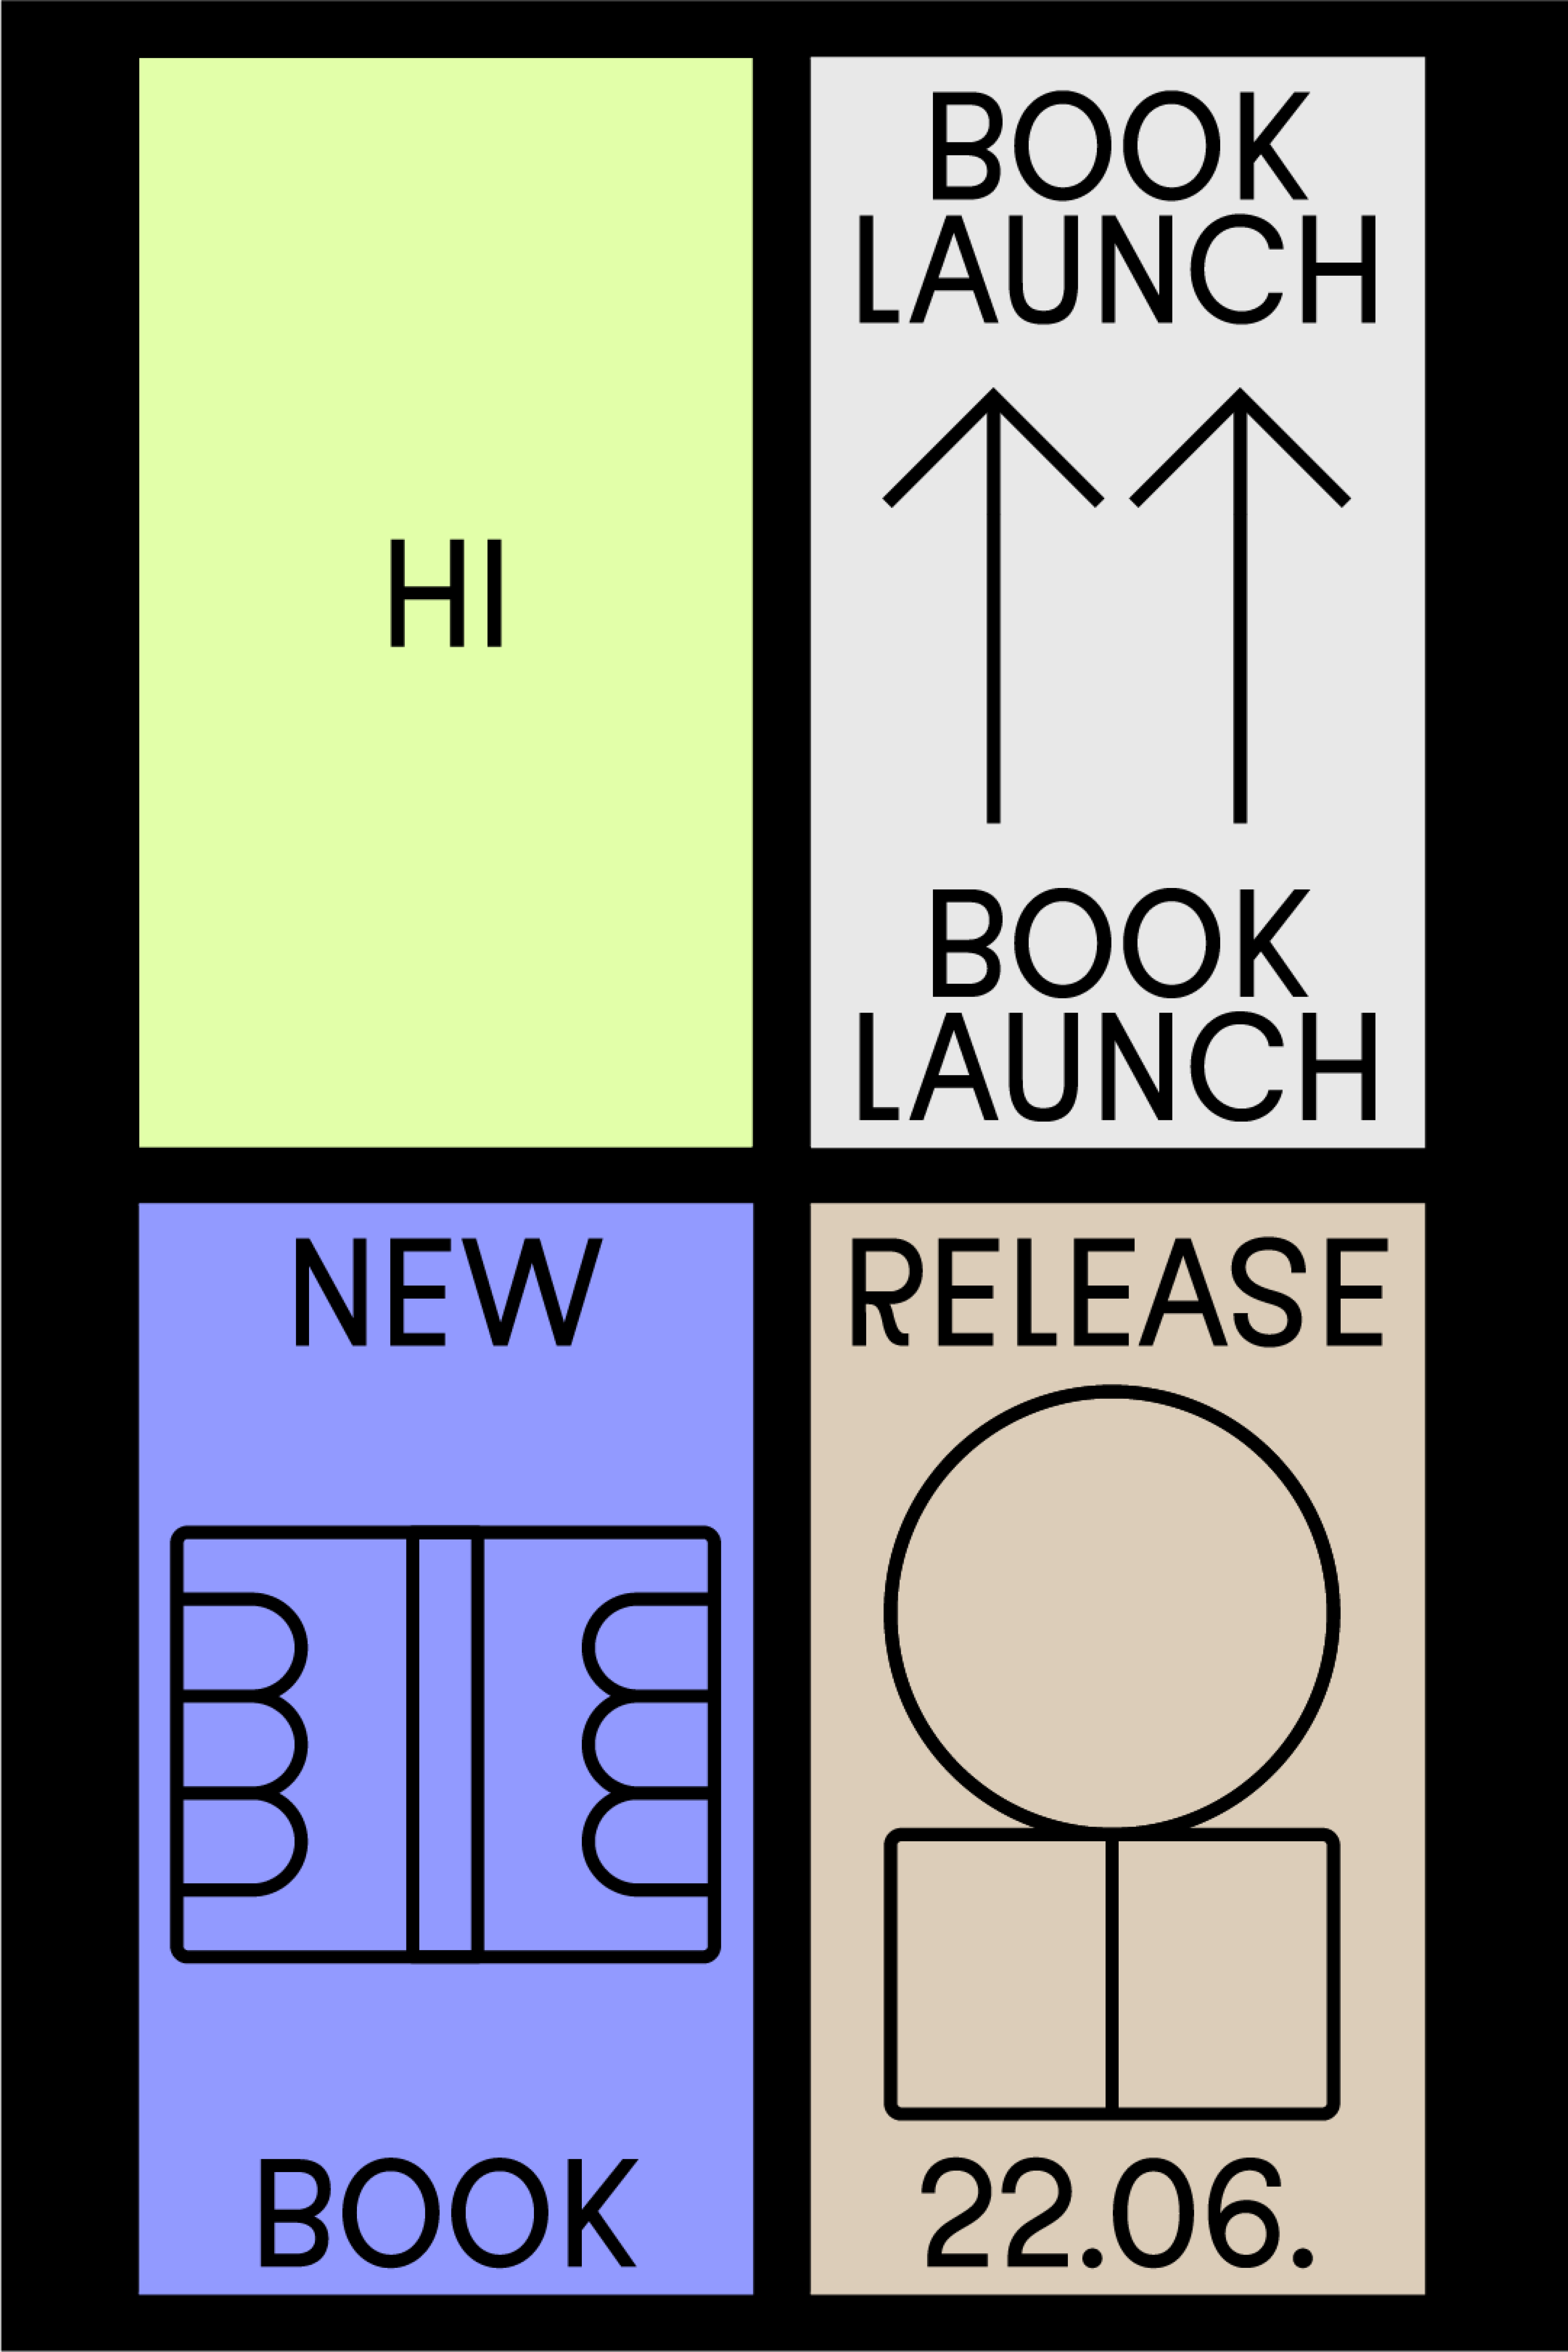 Four different graphics that serve to announce different activities